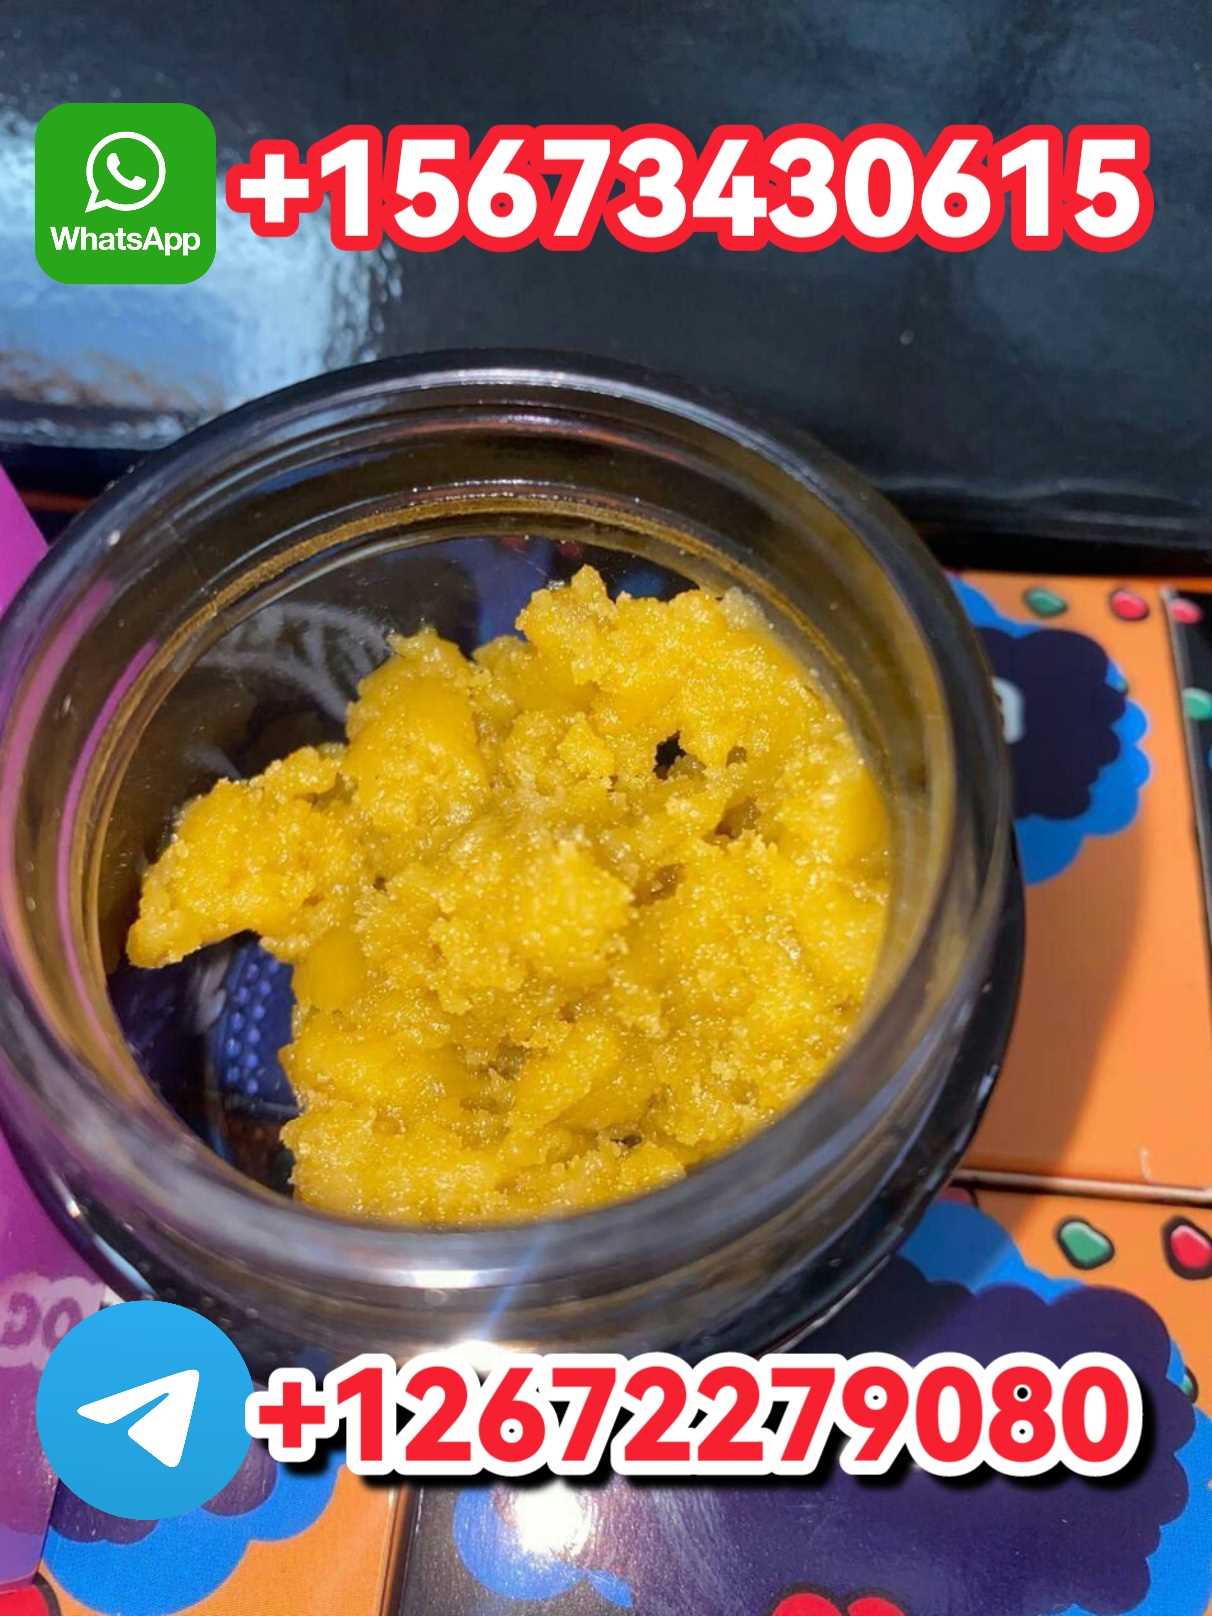 +12672279080 TO ORDE THC OIL, XANAX AND SHROOMS IN MILANO ITALY